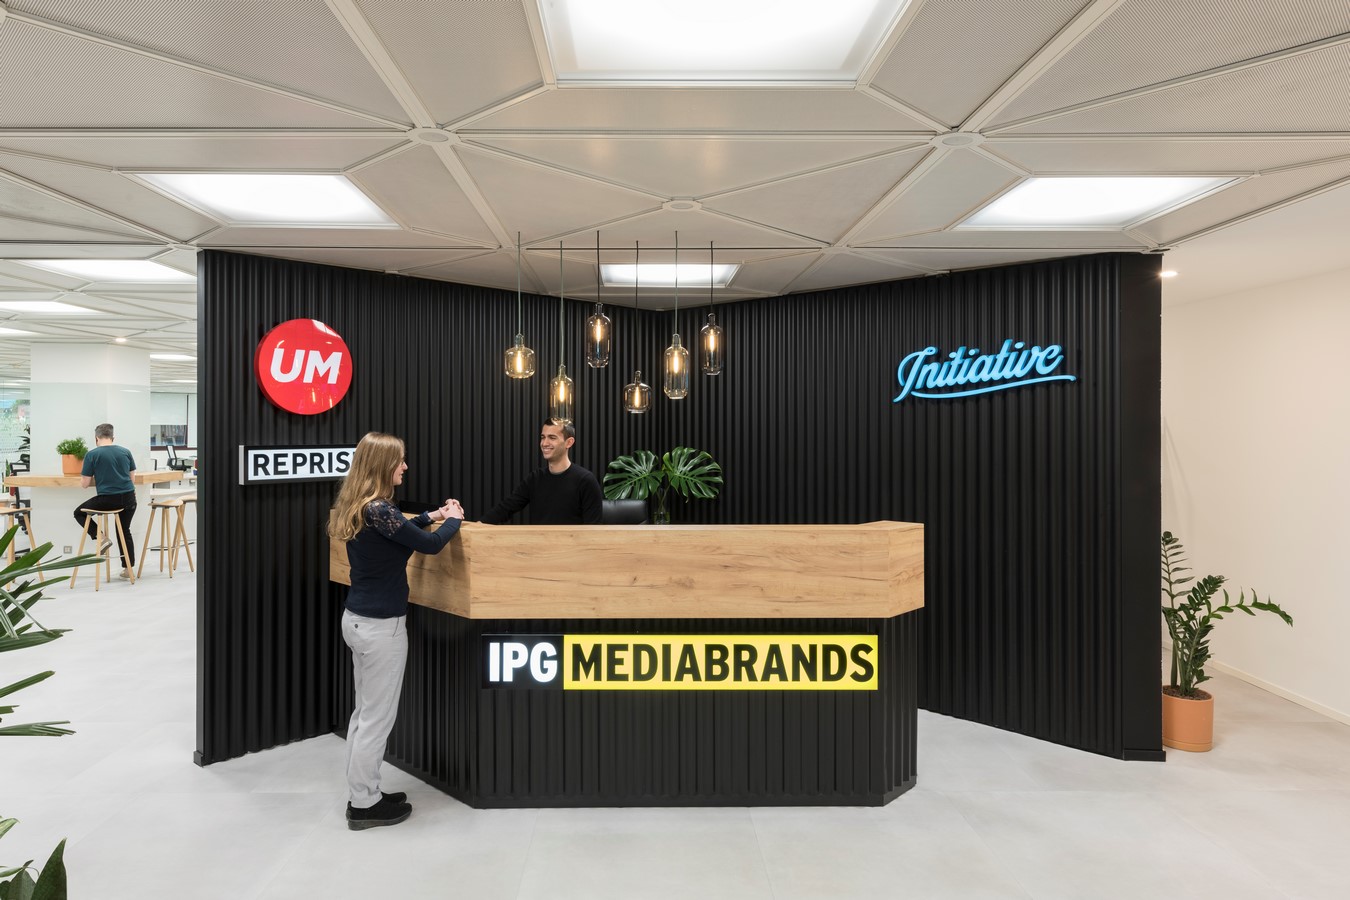  Mediabrands Offices By CaSA Colombo and Serboli Architecture - Sheet9